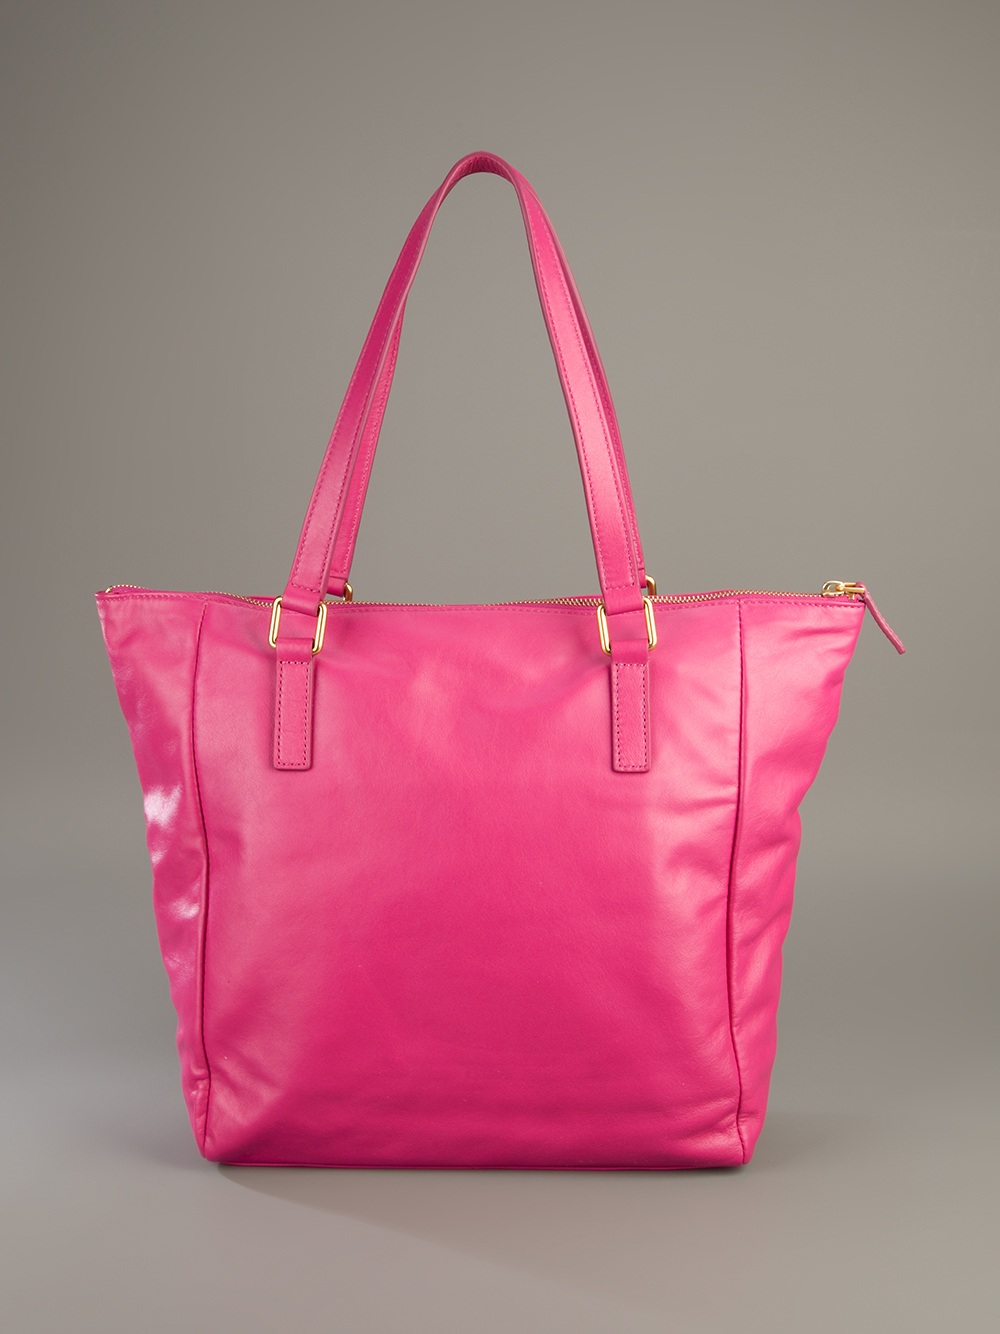 Urbane Mannequin ♦: 100% AUTHENTIC MARC BY MARC JACOBS LEATHER TAKE ME TOTE BAG